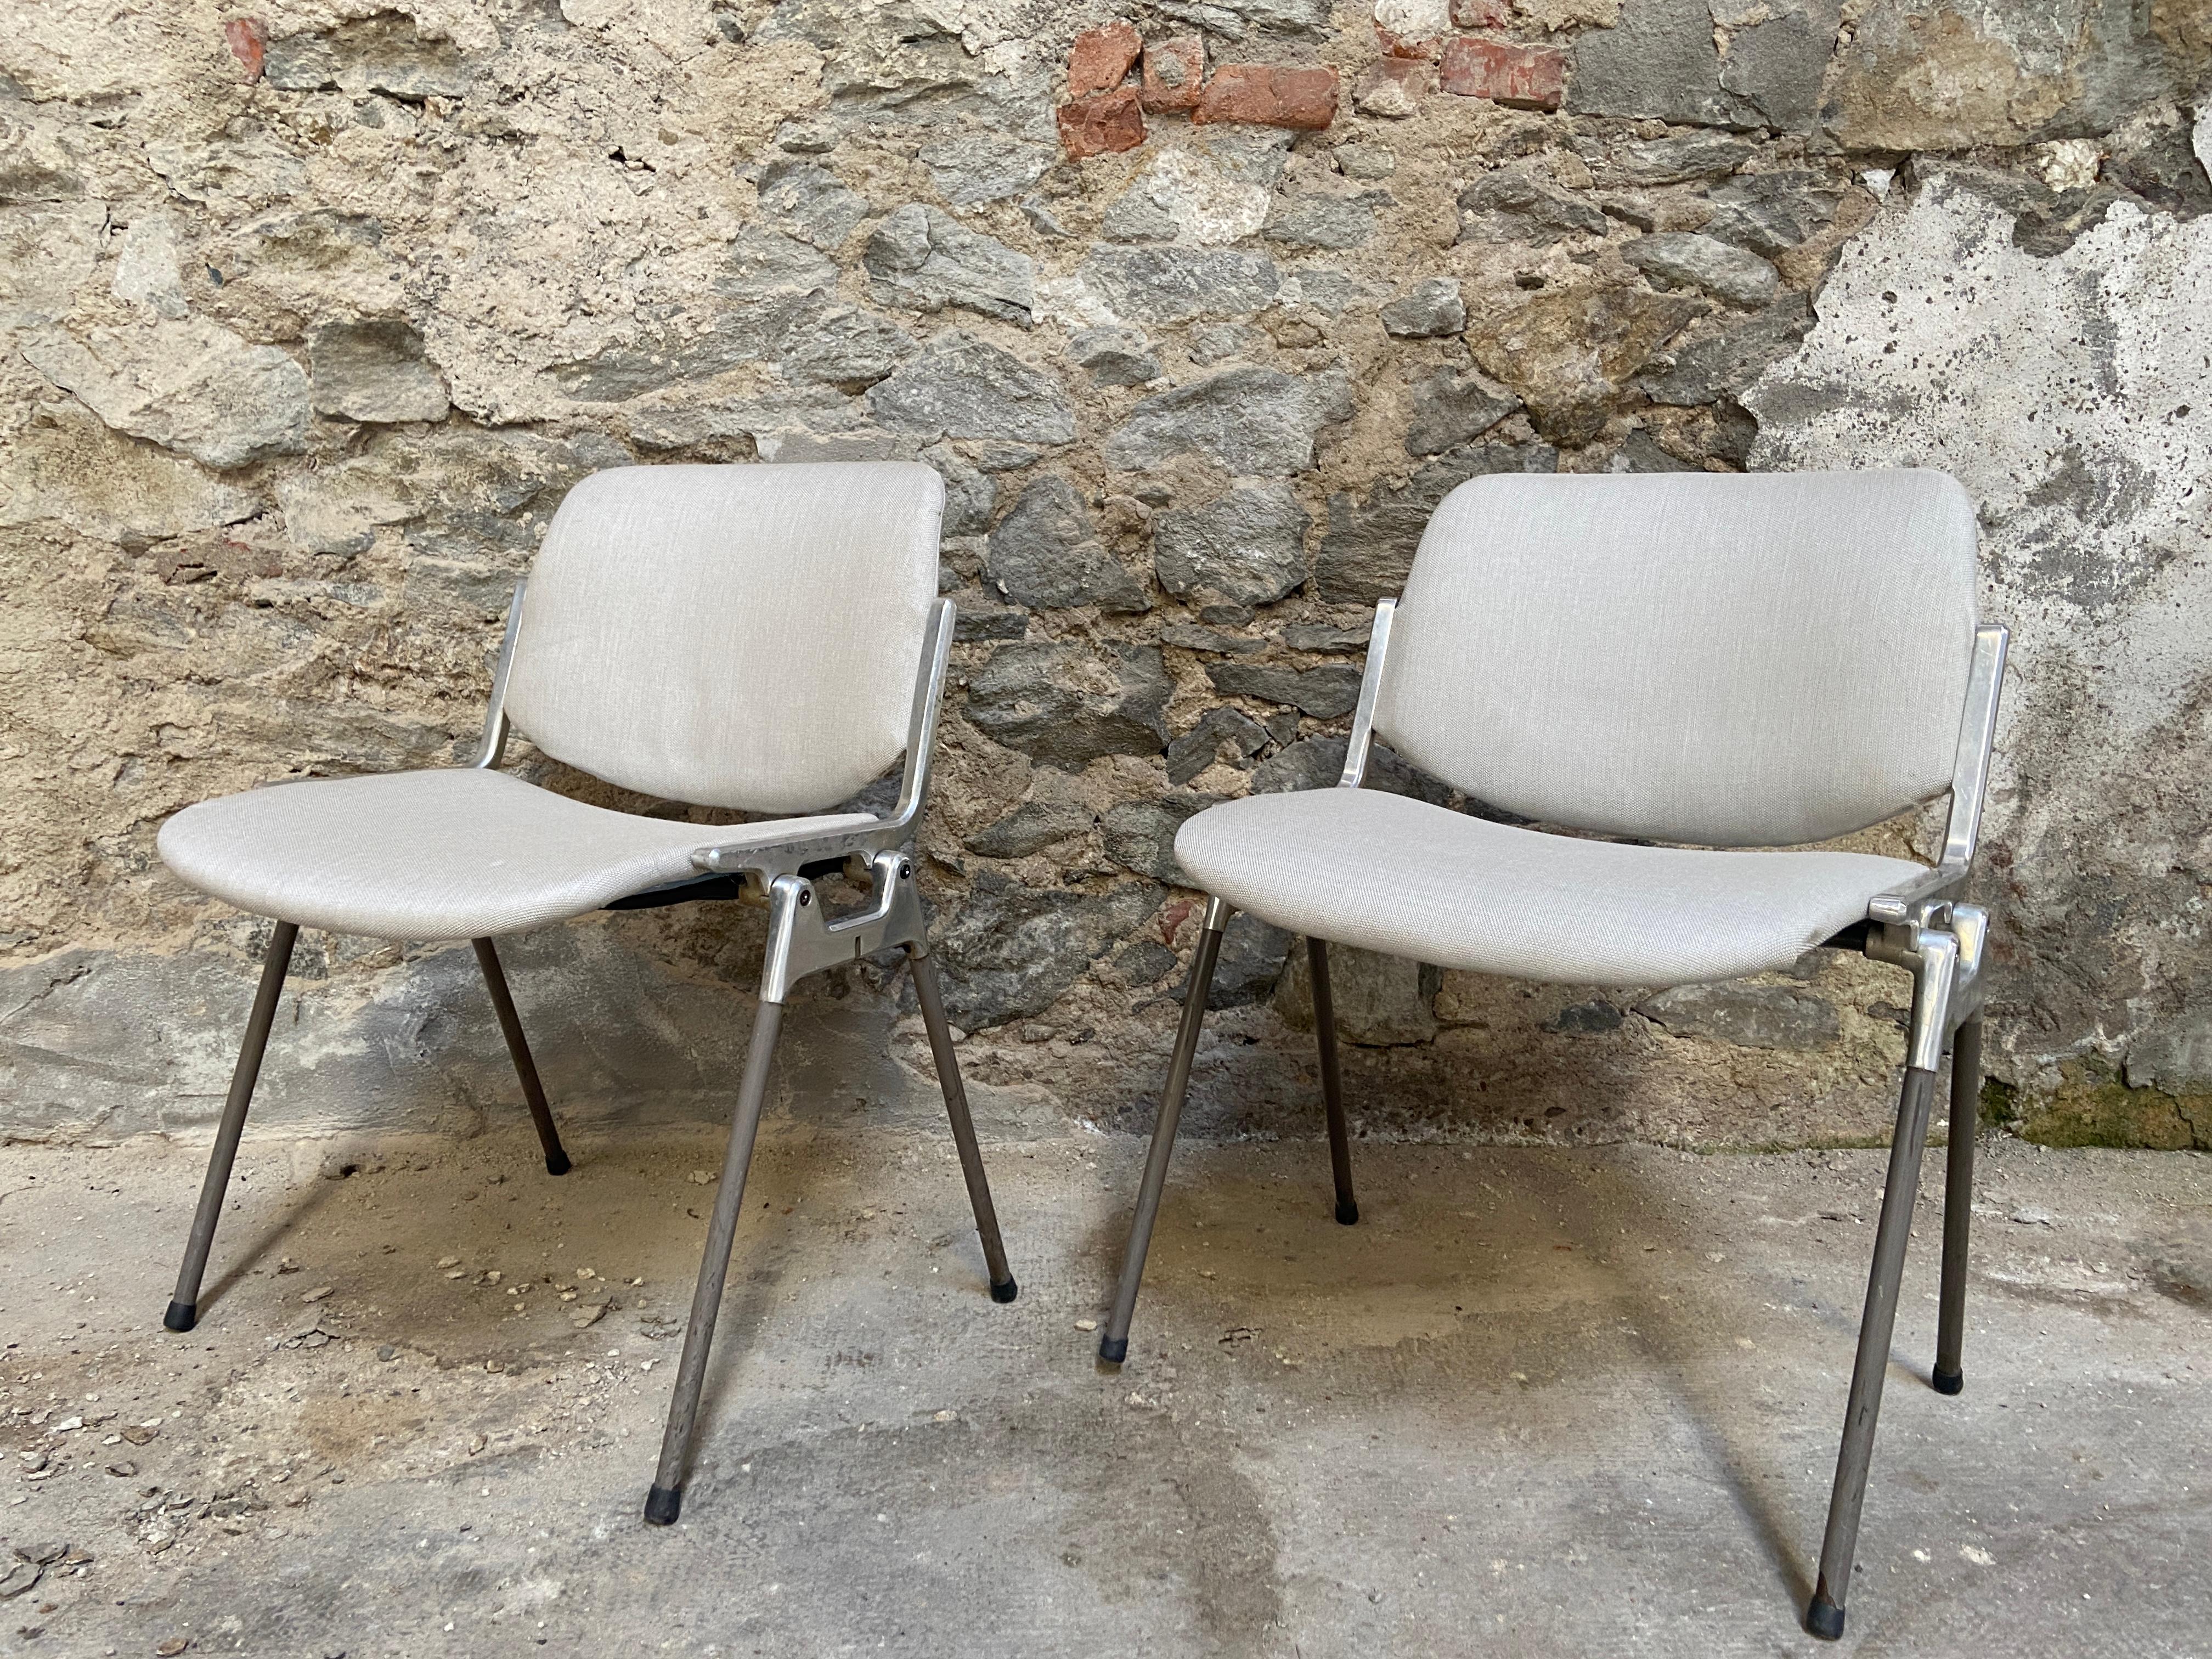 Aluminum Mid-Century Modern Italian Set of Four Dsc 106 Chairs by Anonima Castelli, 1960s For Sale